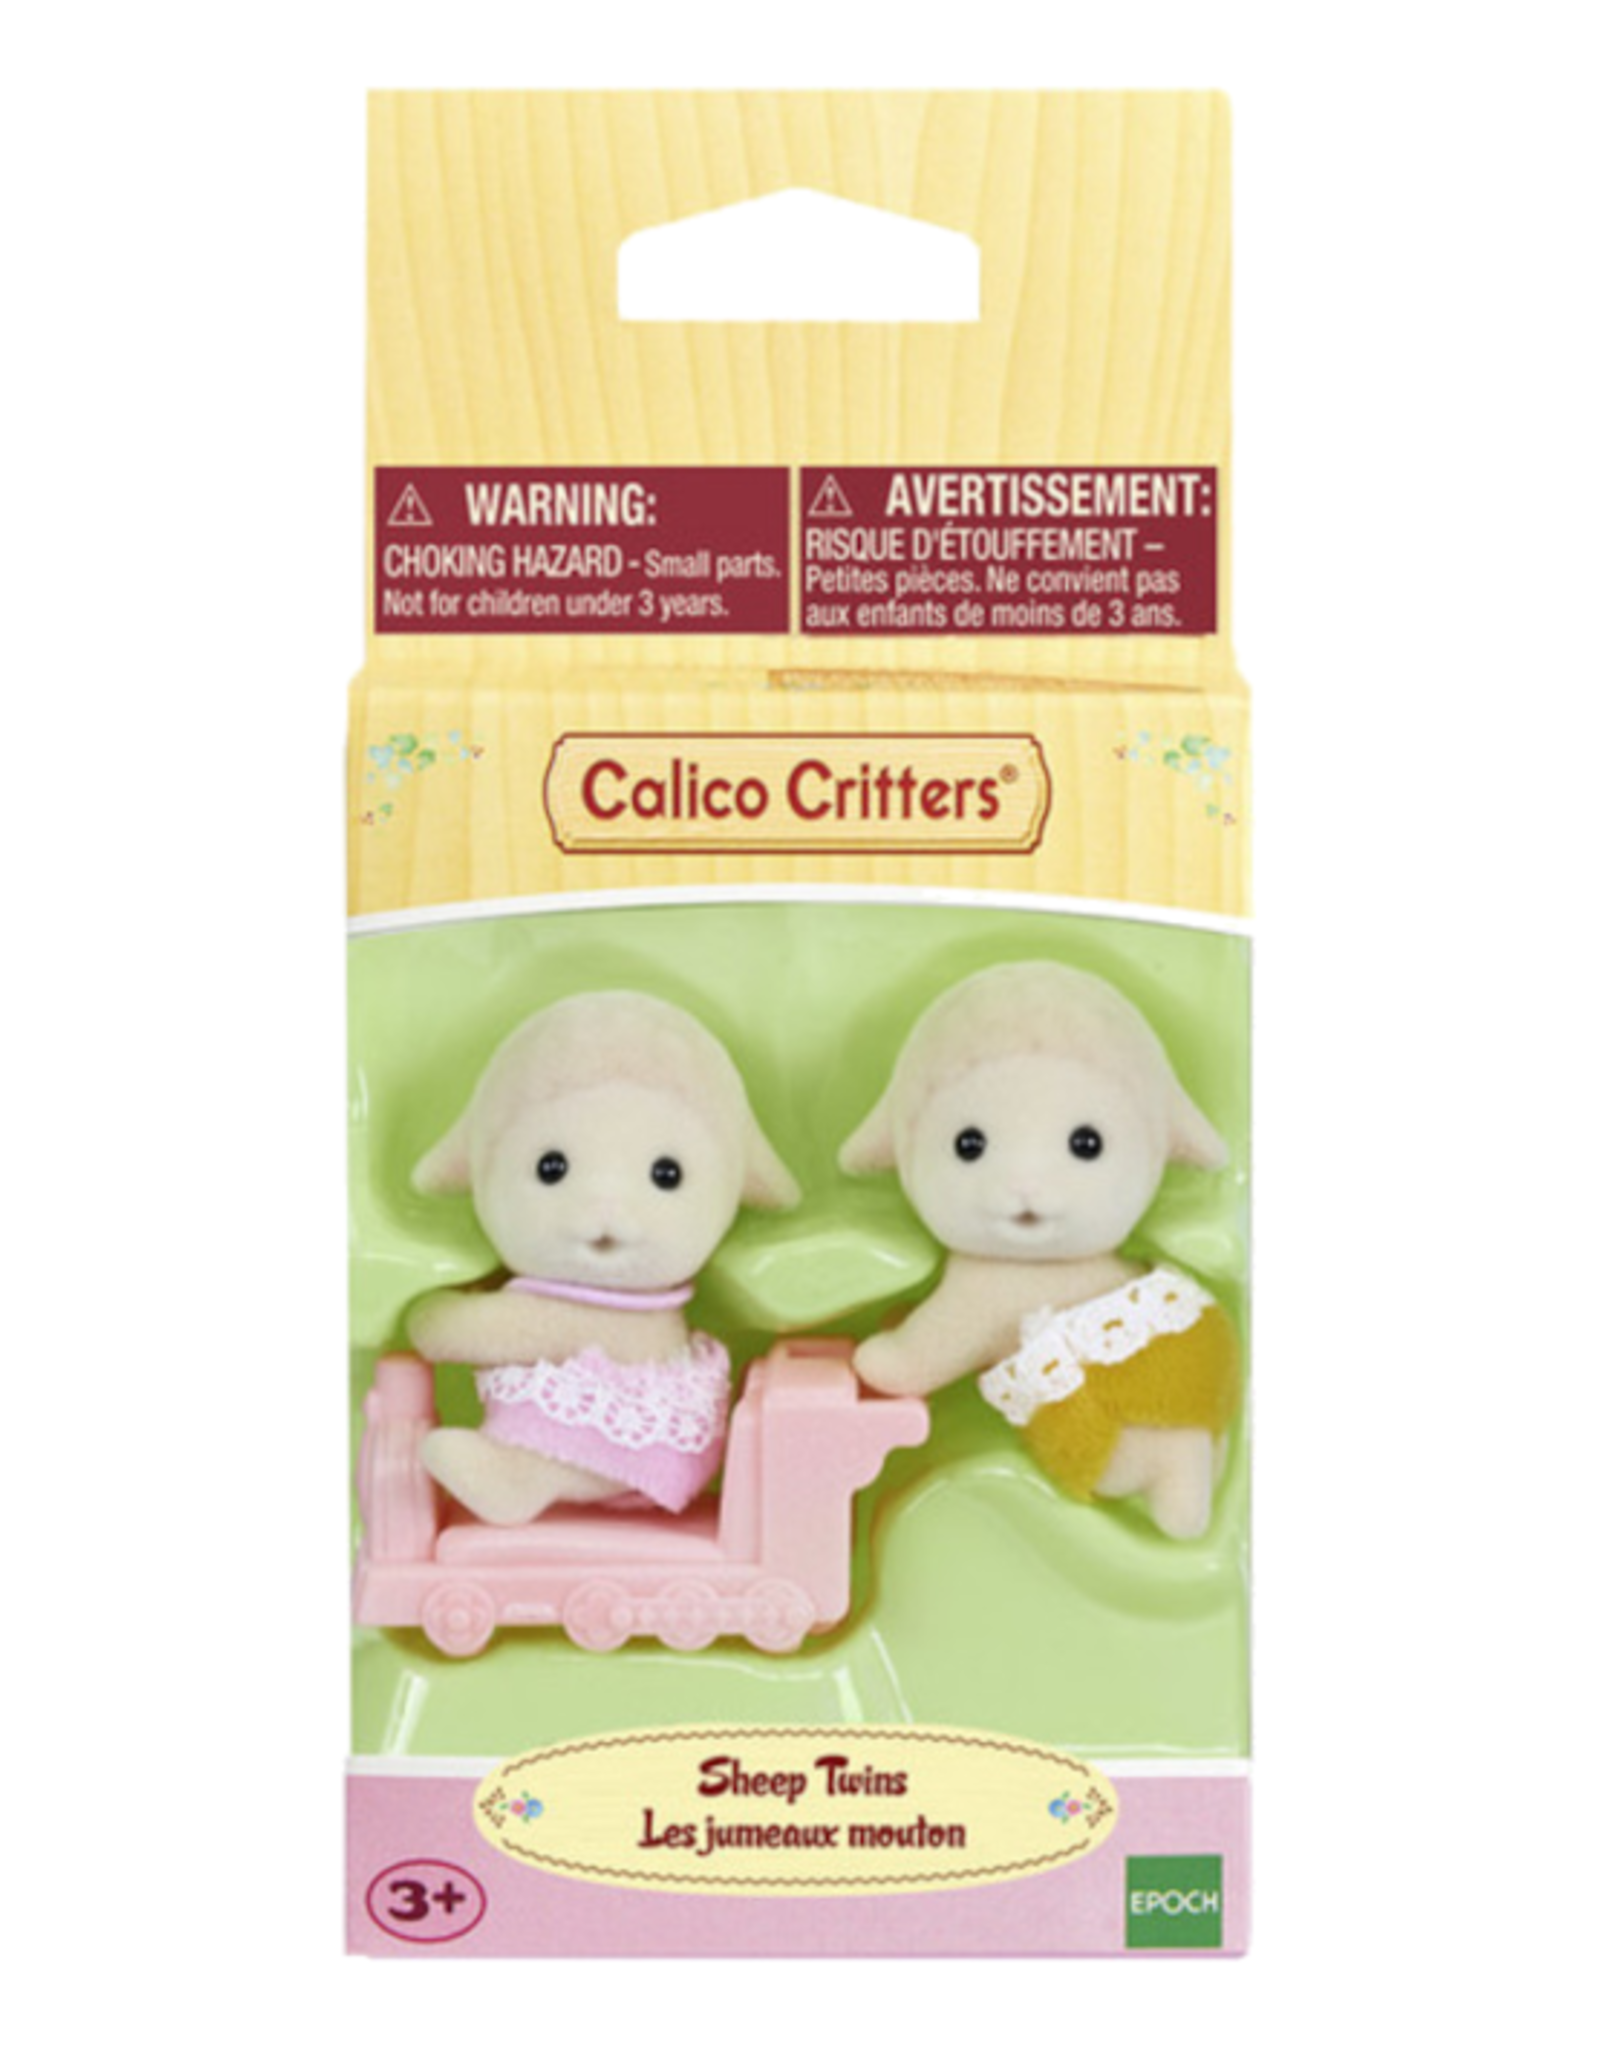 Calico Critters Calico Critters - Sheep Twins